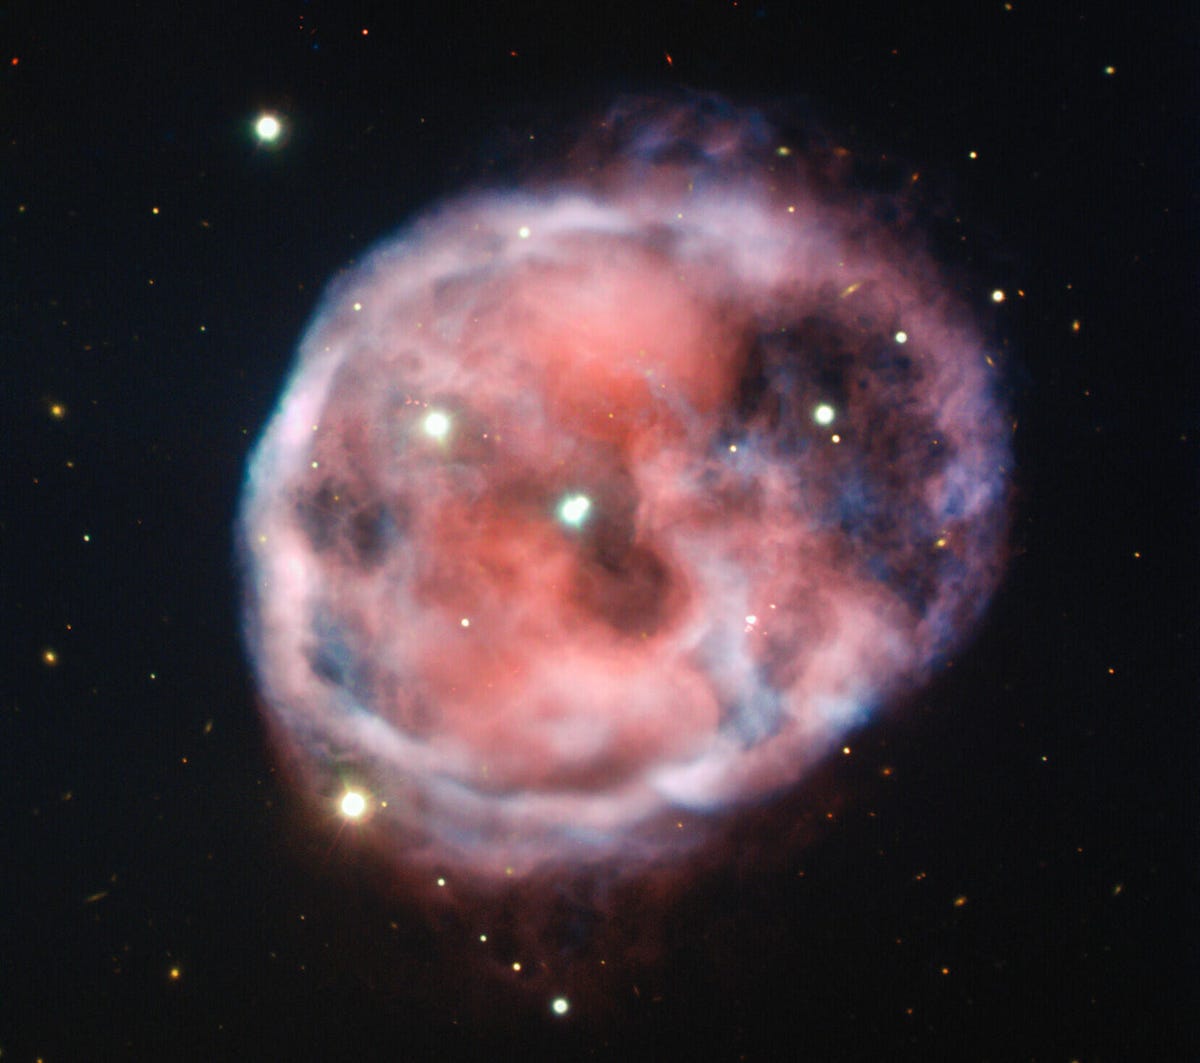 Blobby looking nebula looks a little like a cute round skull with two eyes and a mouth against the backdrop of starry space.